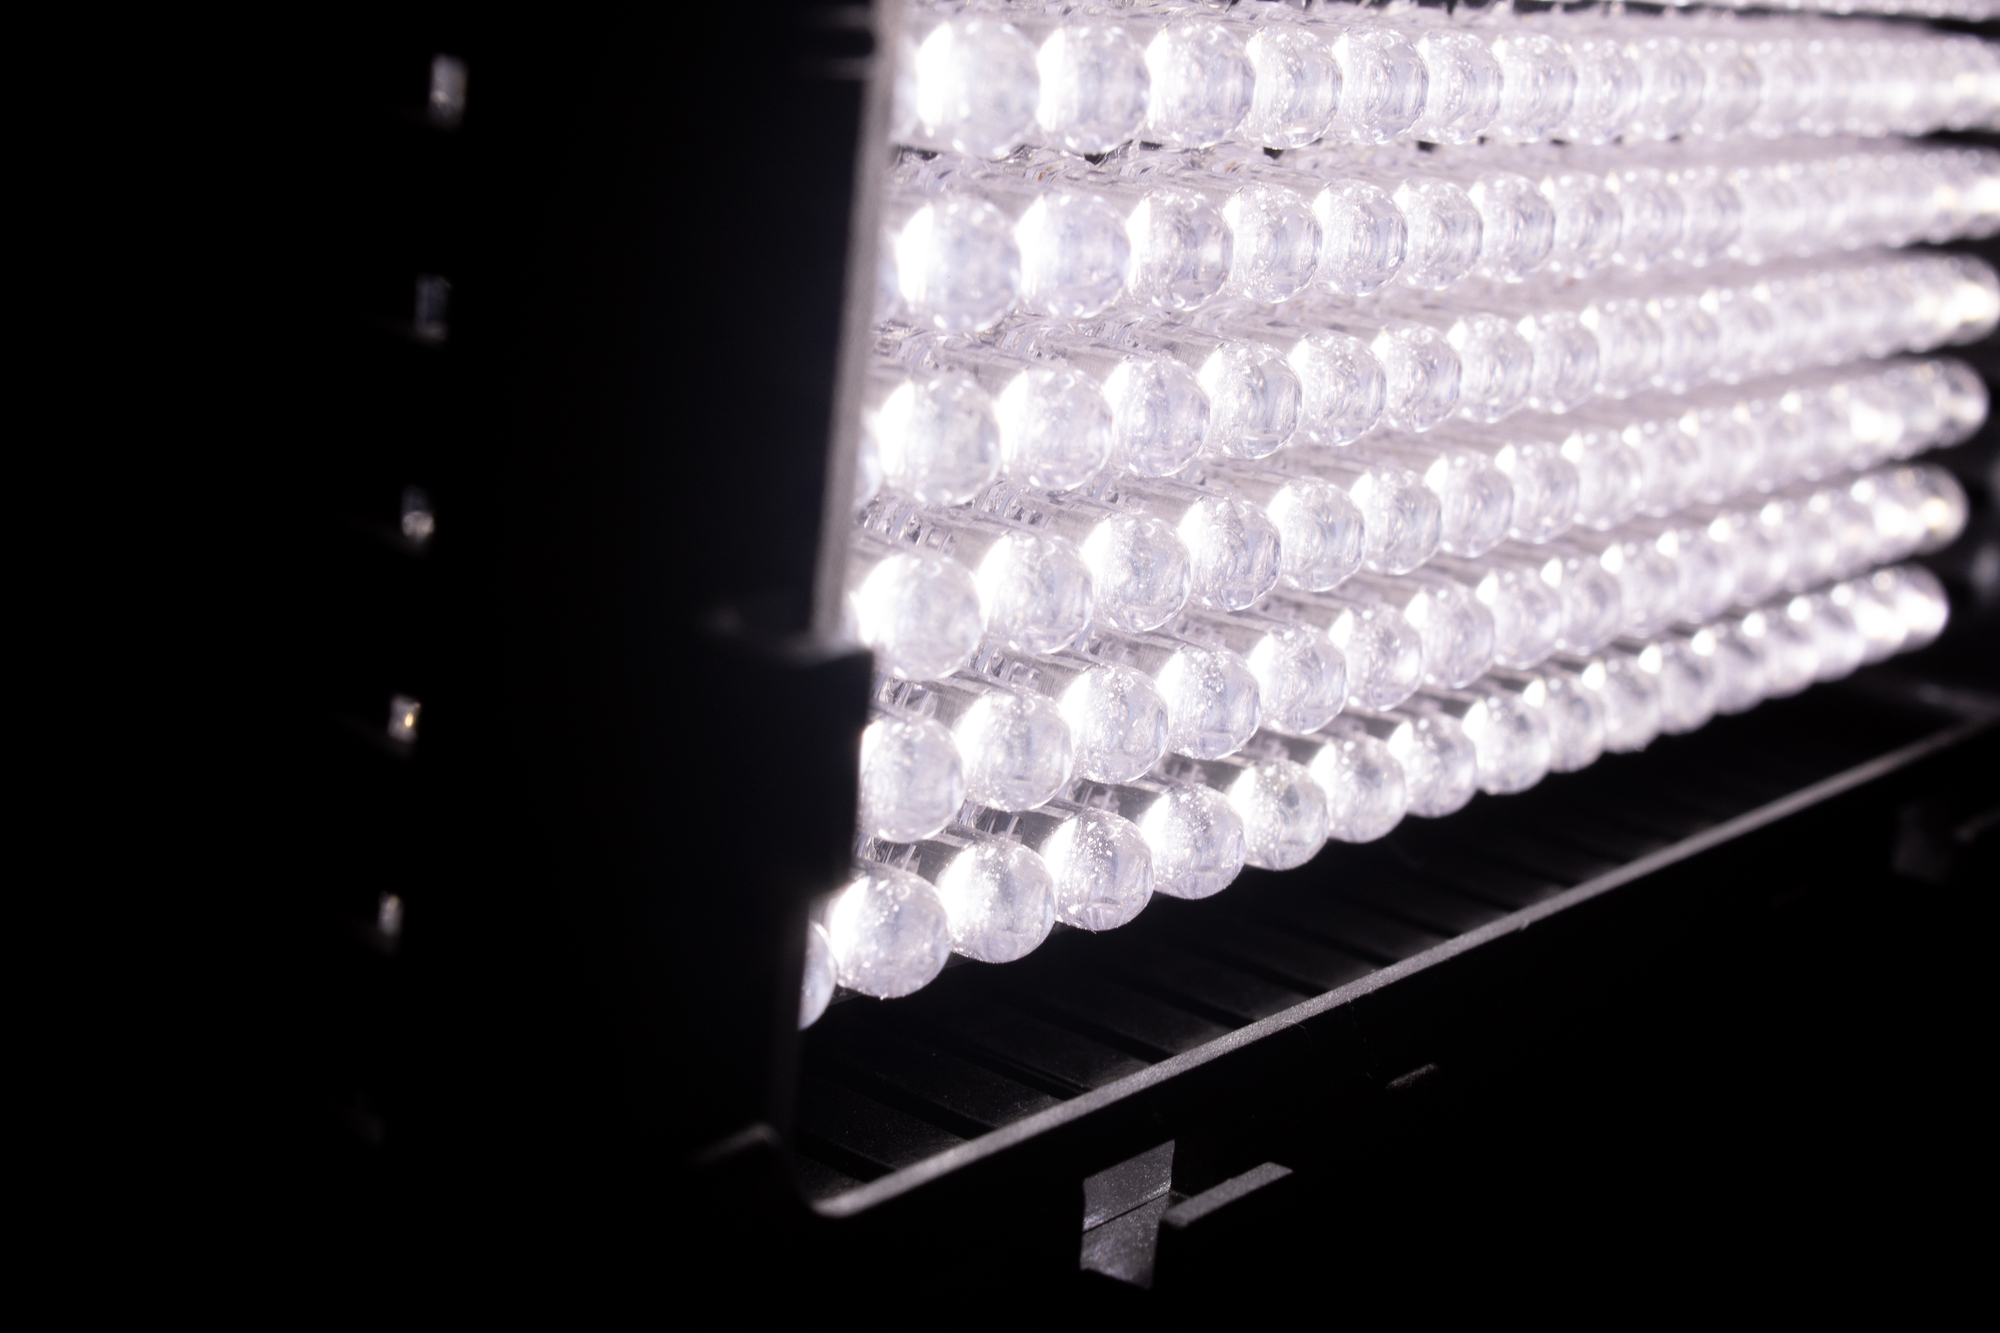 led light for photography